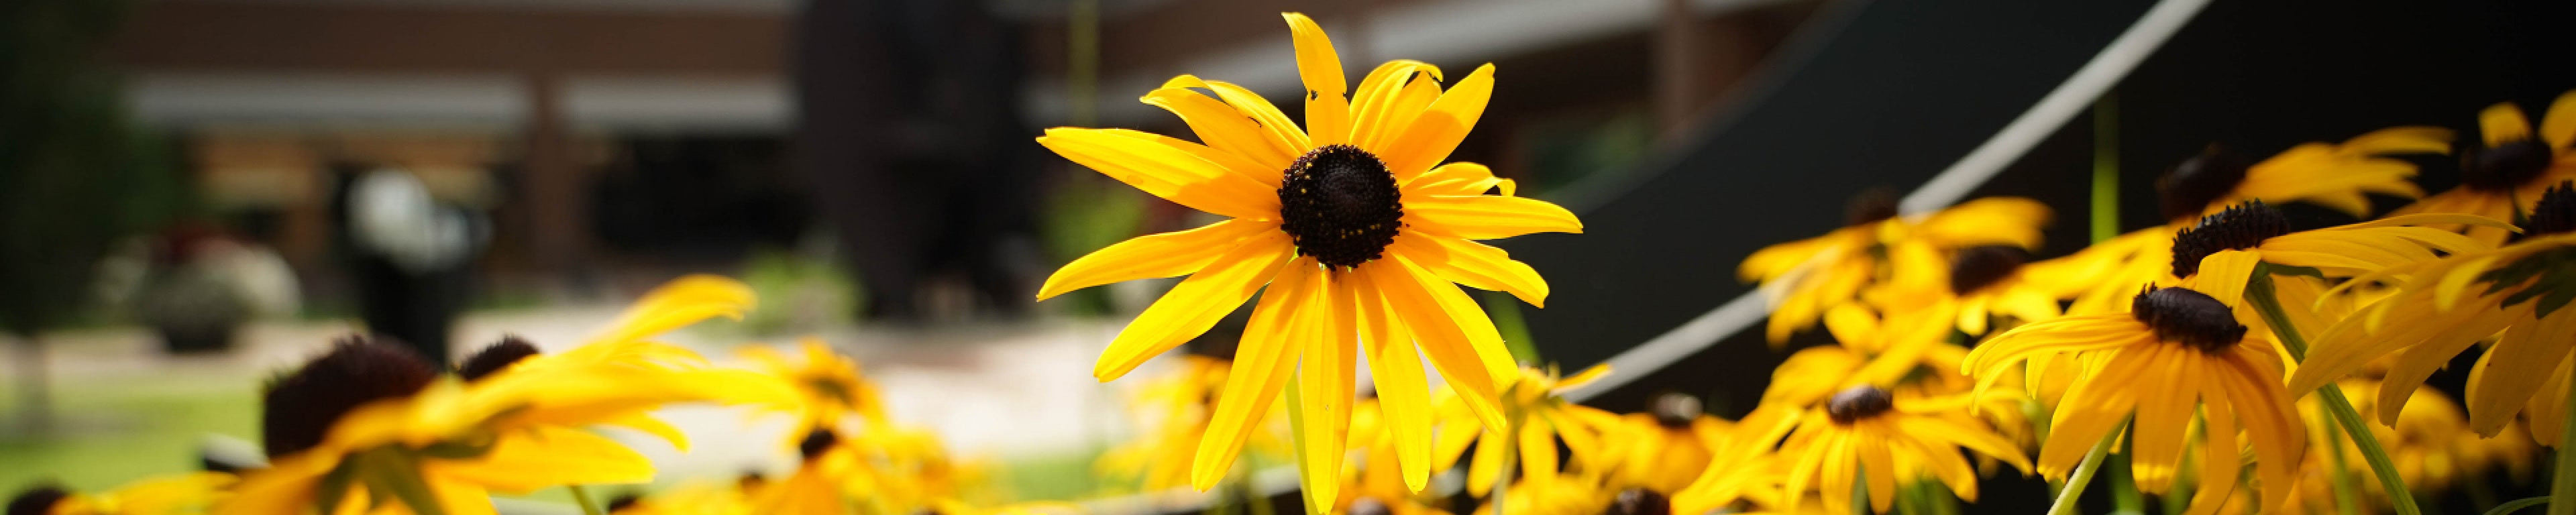 Black Eyed Susan flowers in the sunlight on campus.